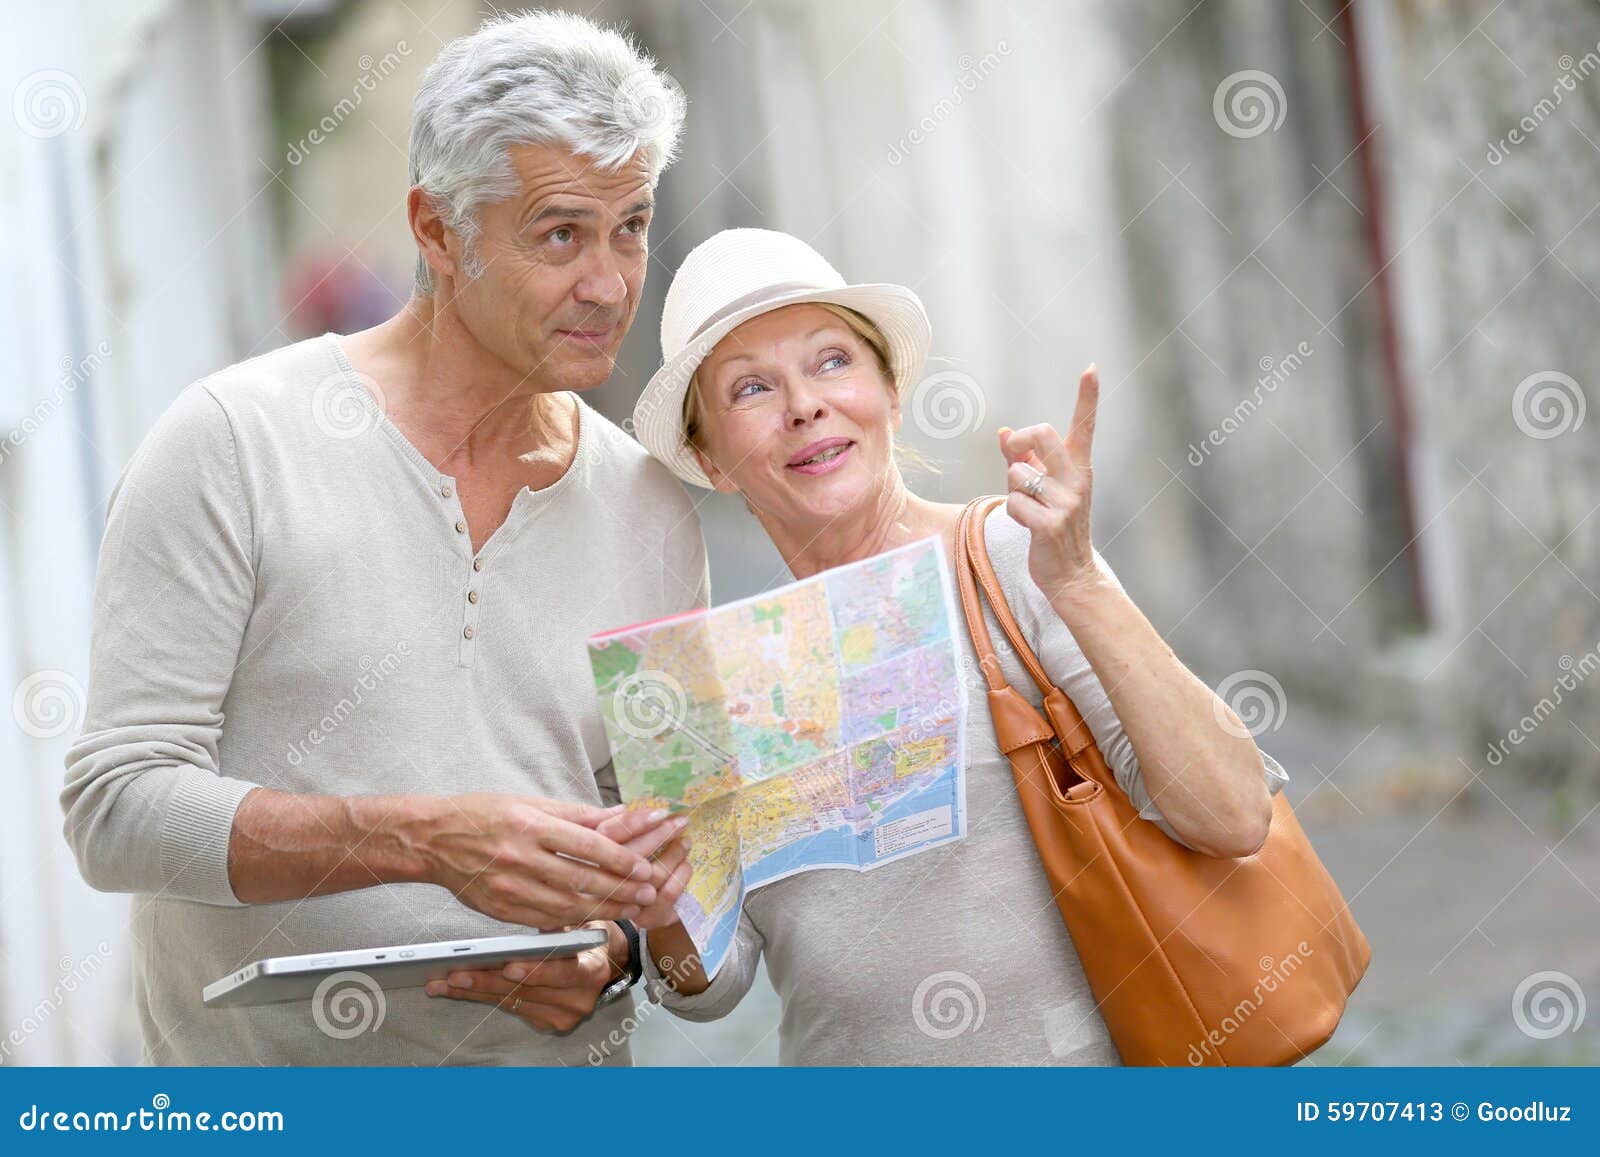 trendy senior tourists visiting town using tablet and map